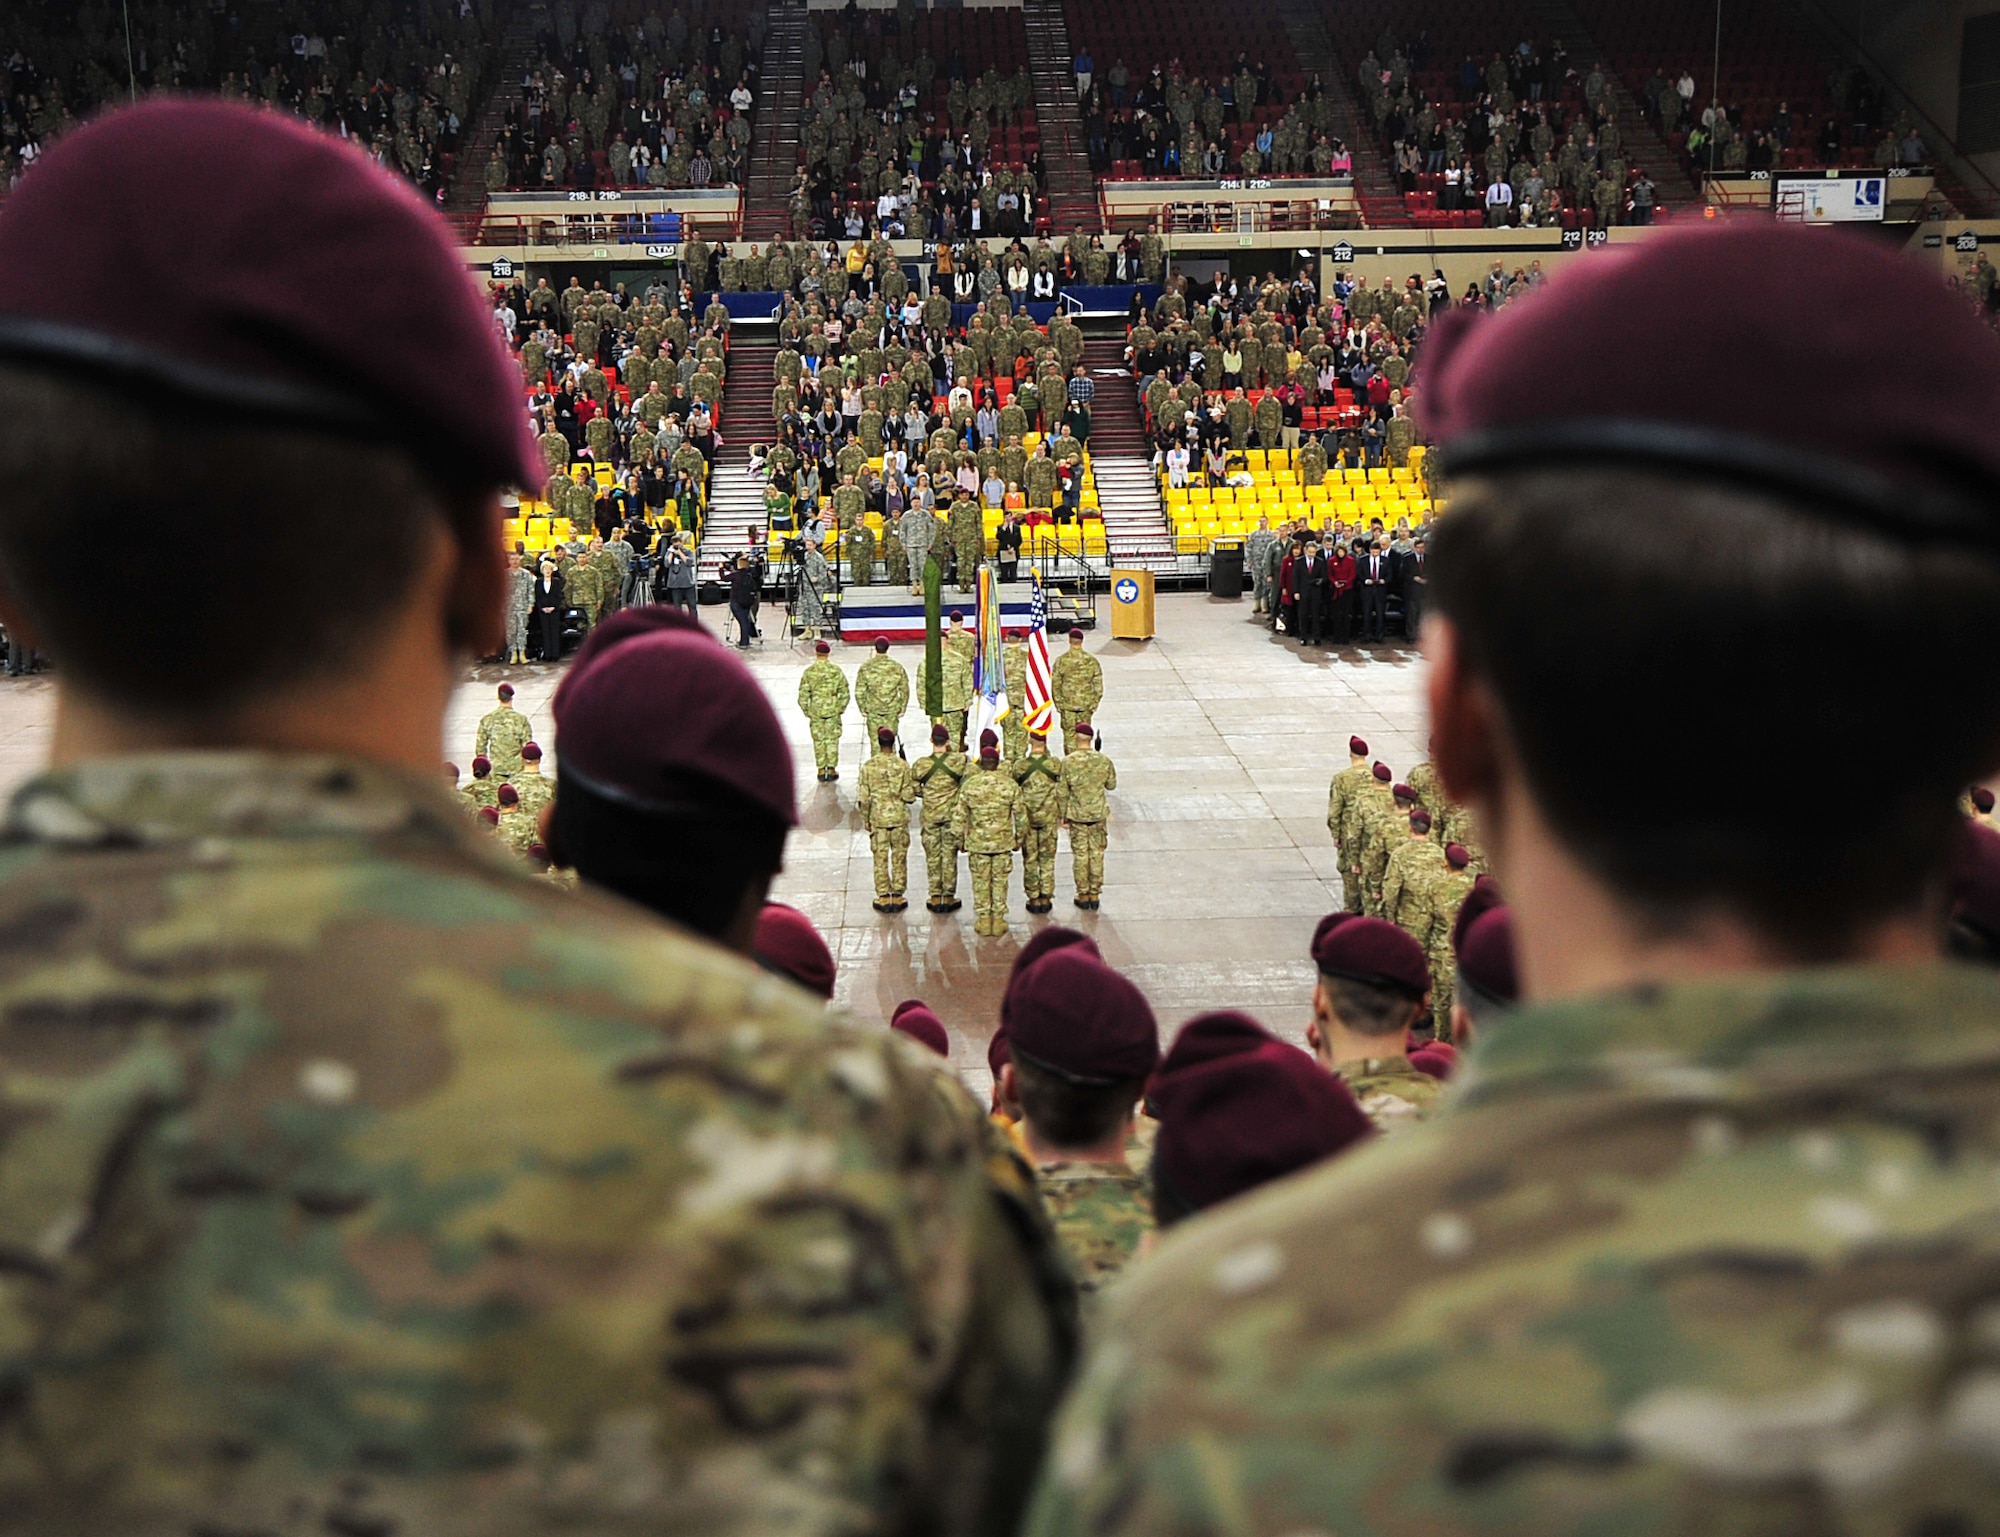 Soldiers from 4th Brigade Combat Team (Airborne), 25th Infantry Division participate on their deployment ceremony at Sullivan Arena, Anchorage, Alaska, Nov. 29, 2011. The 4-25 ABCT "Spartan Brigade" will deploy 3,500 Soldiers on a series of flights in November and December en route to Afghanistan.  (U.S. Air Force photo/Staff Sgt. Sheila deVera)